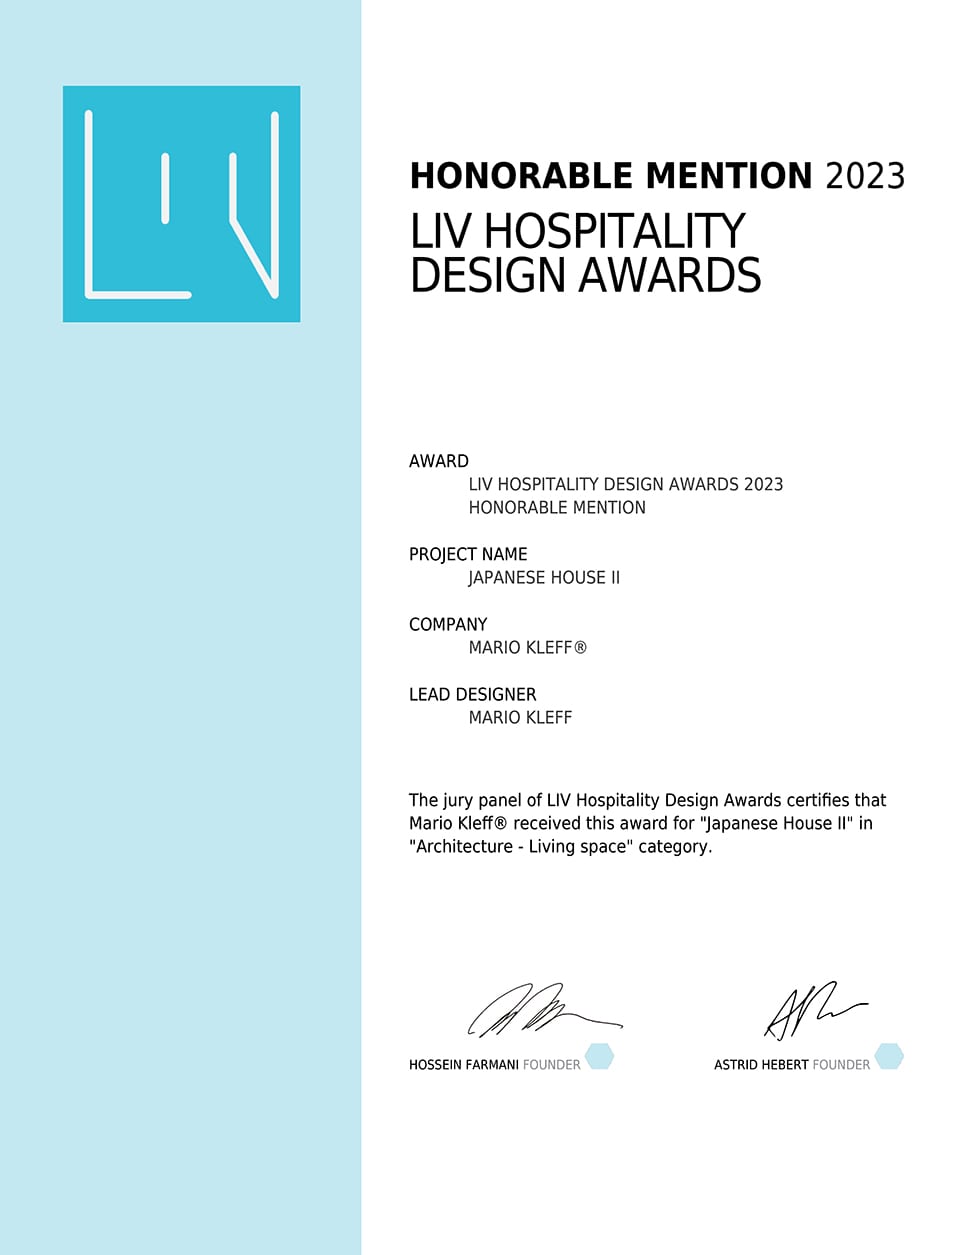 Mario Kleff wins Honorable Mention in 2023 LIV Hospitality Design Awards